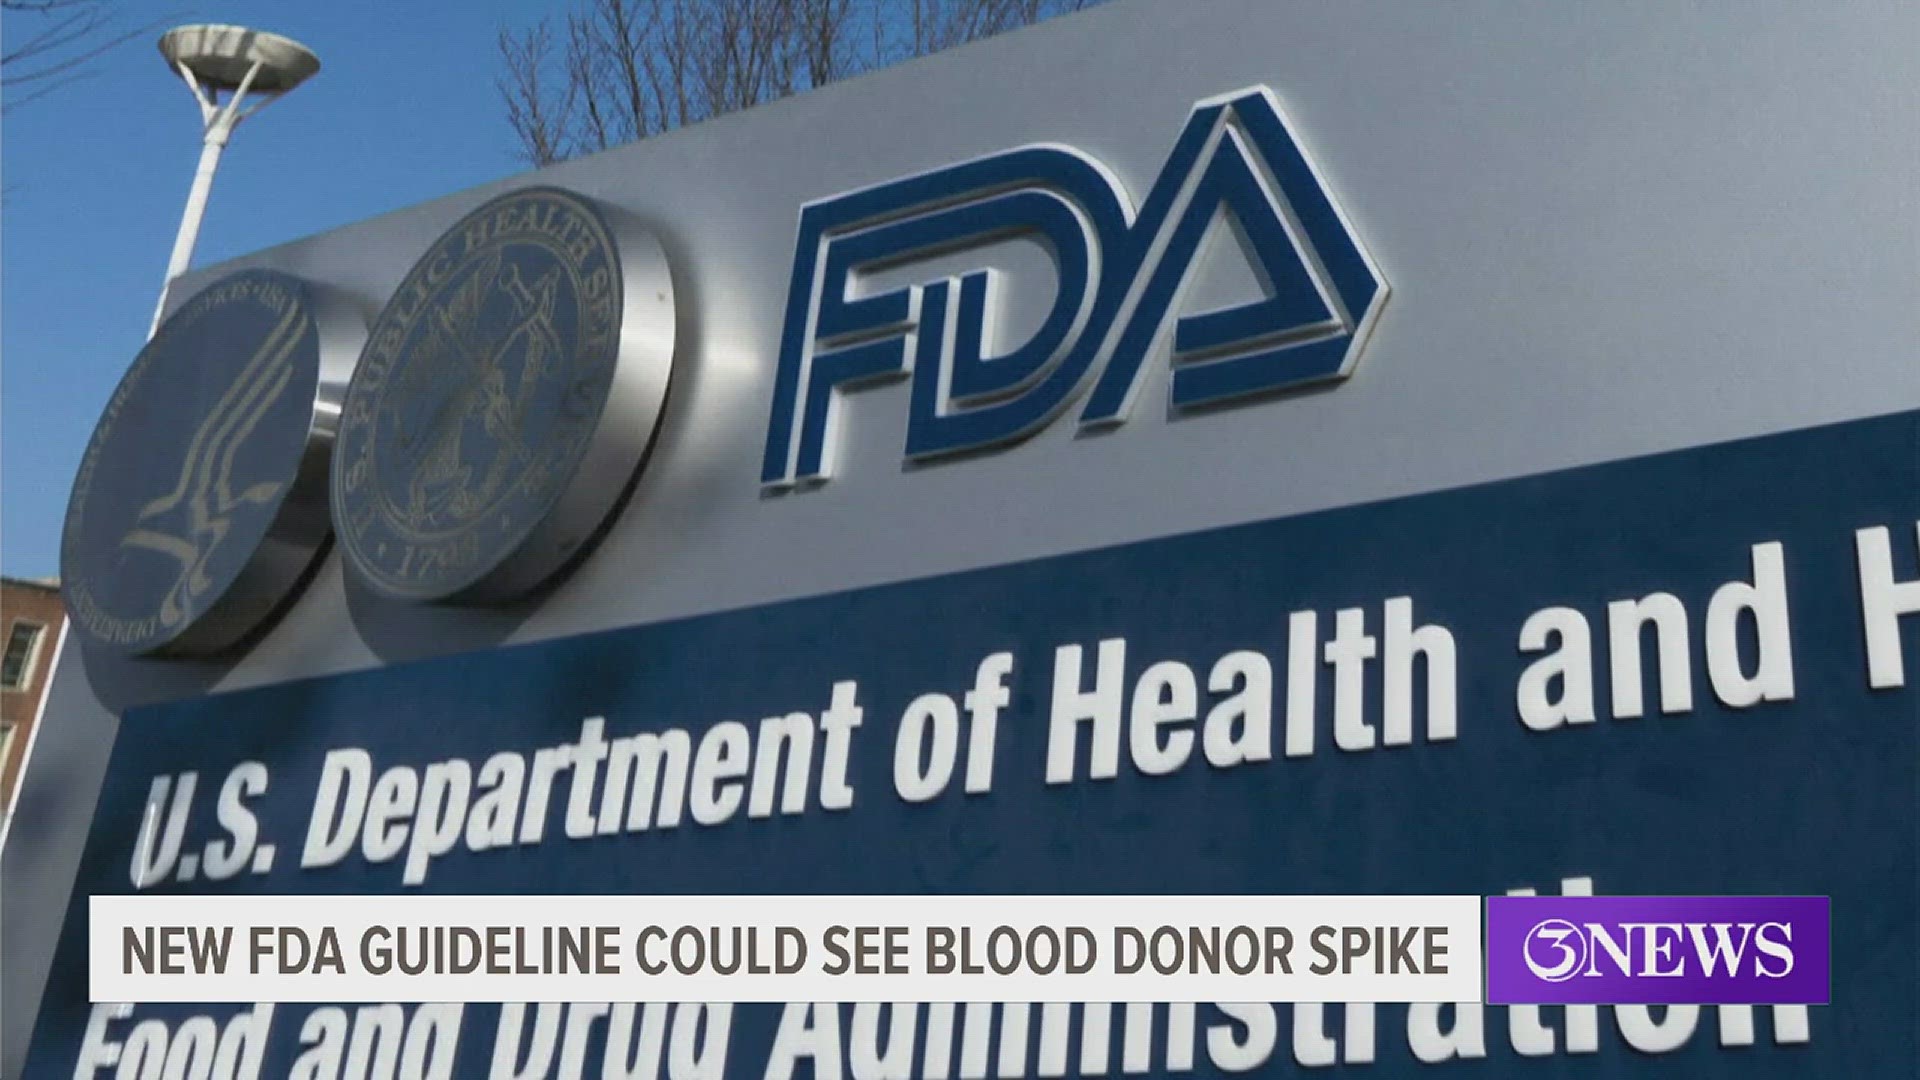 In the past, gay or bisexual men had to wait at least three months to donate blood if they hadn't abstained from sex. A new FDA regulation now changes that process.